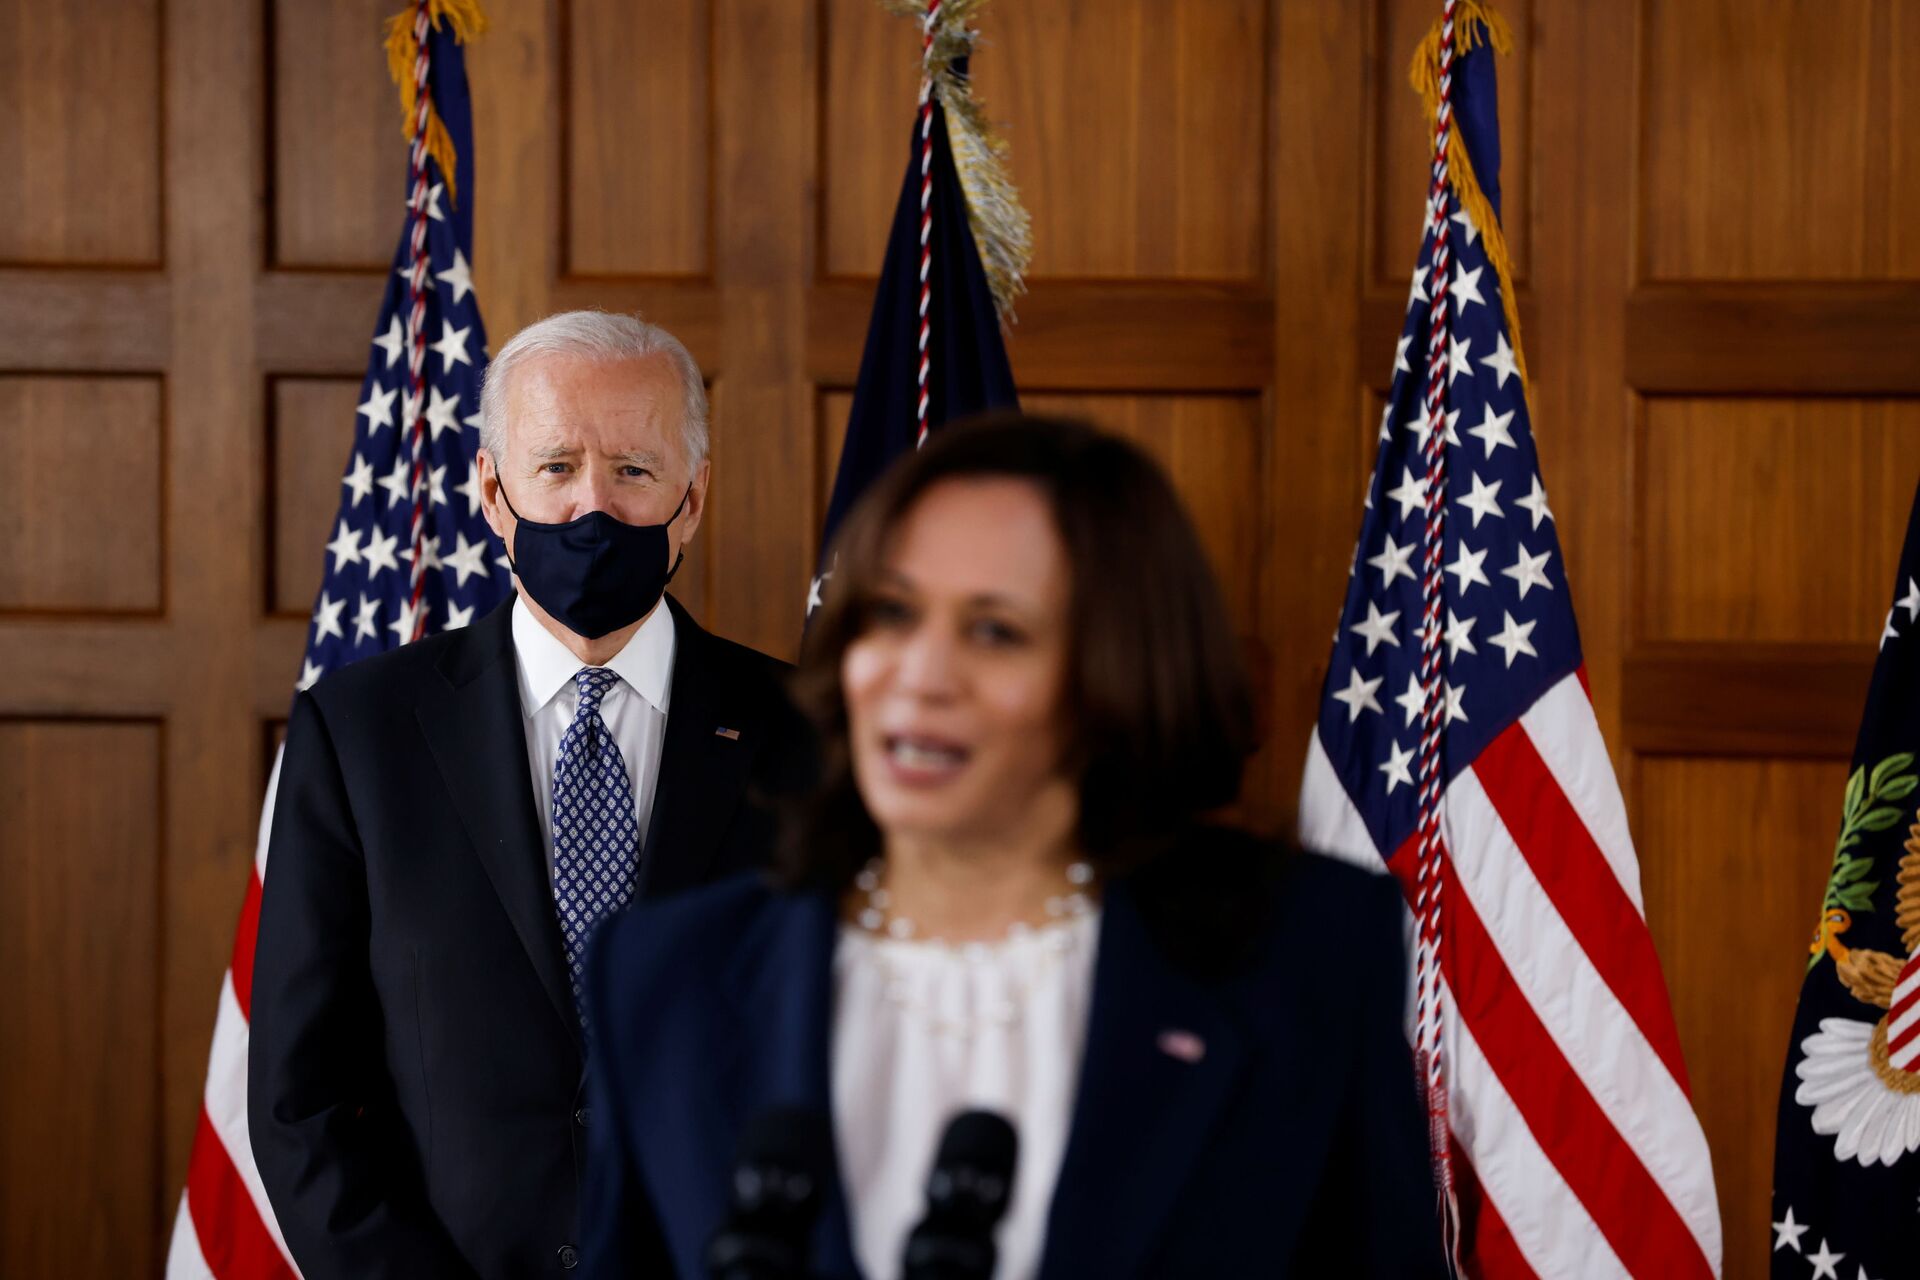 US President Joe Biden and Vice President Kamala Harris deliver remarks after a meeting with Asian-American leaders to discuss the ongoing attacks and threats against the community, during a stop at Emory University in Atlanta, Georgia, US, March 19, 2021 - Sputnik International, 1920, 07.09.2021